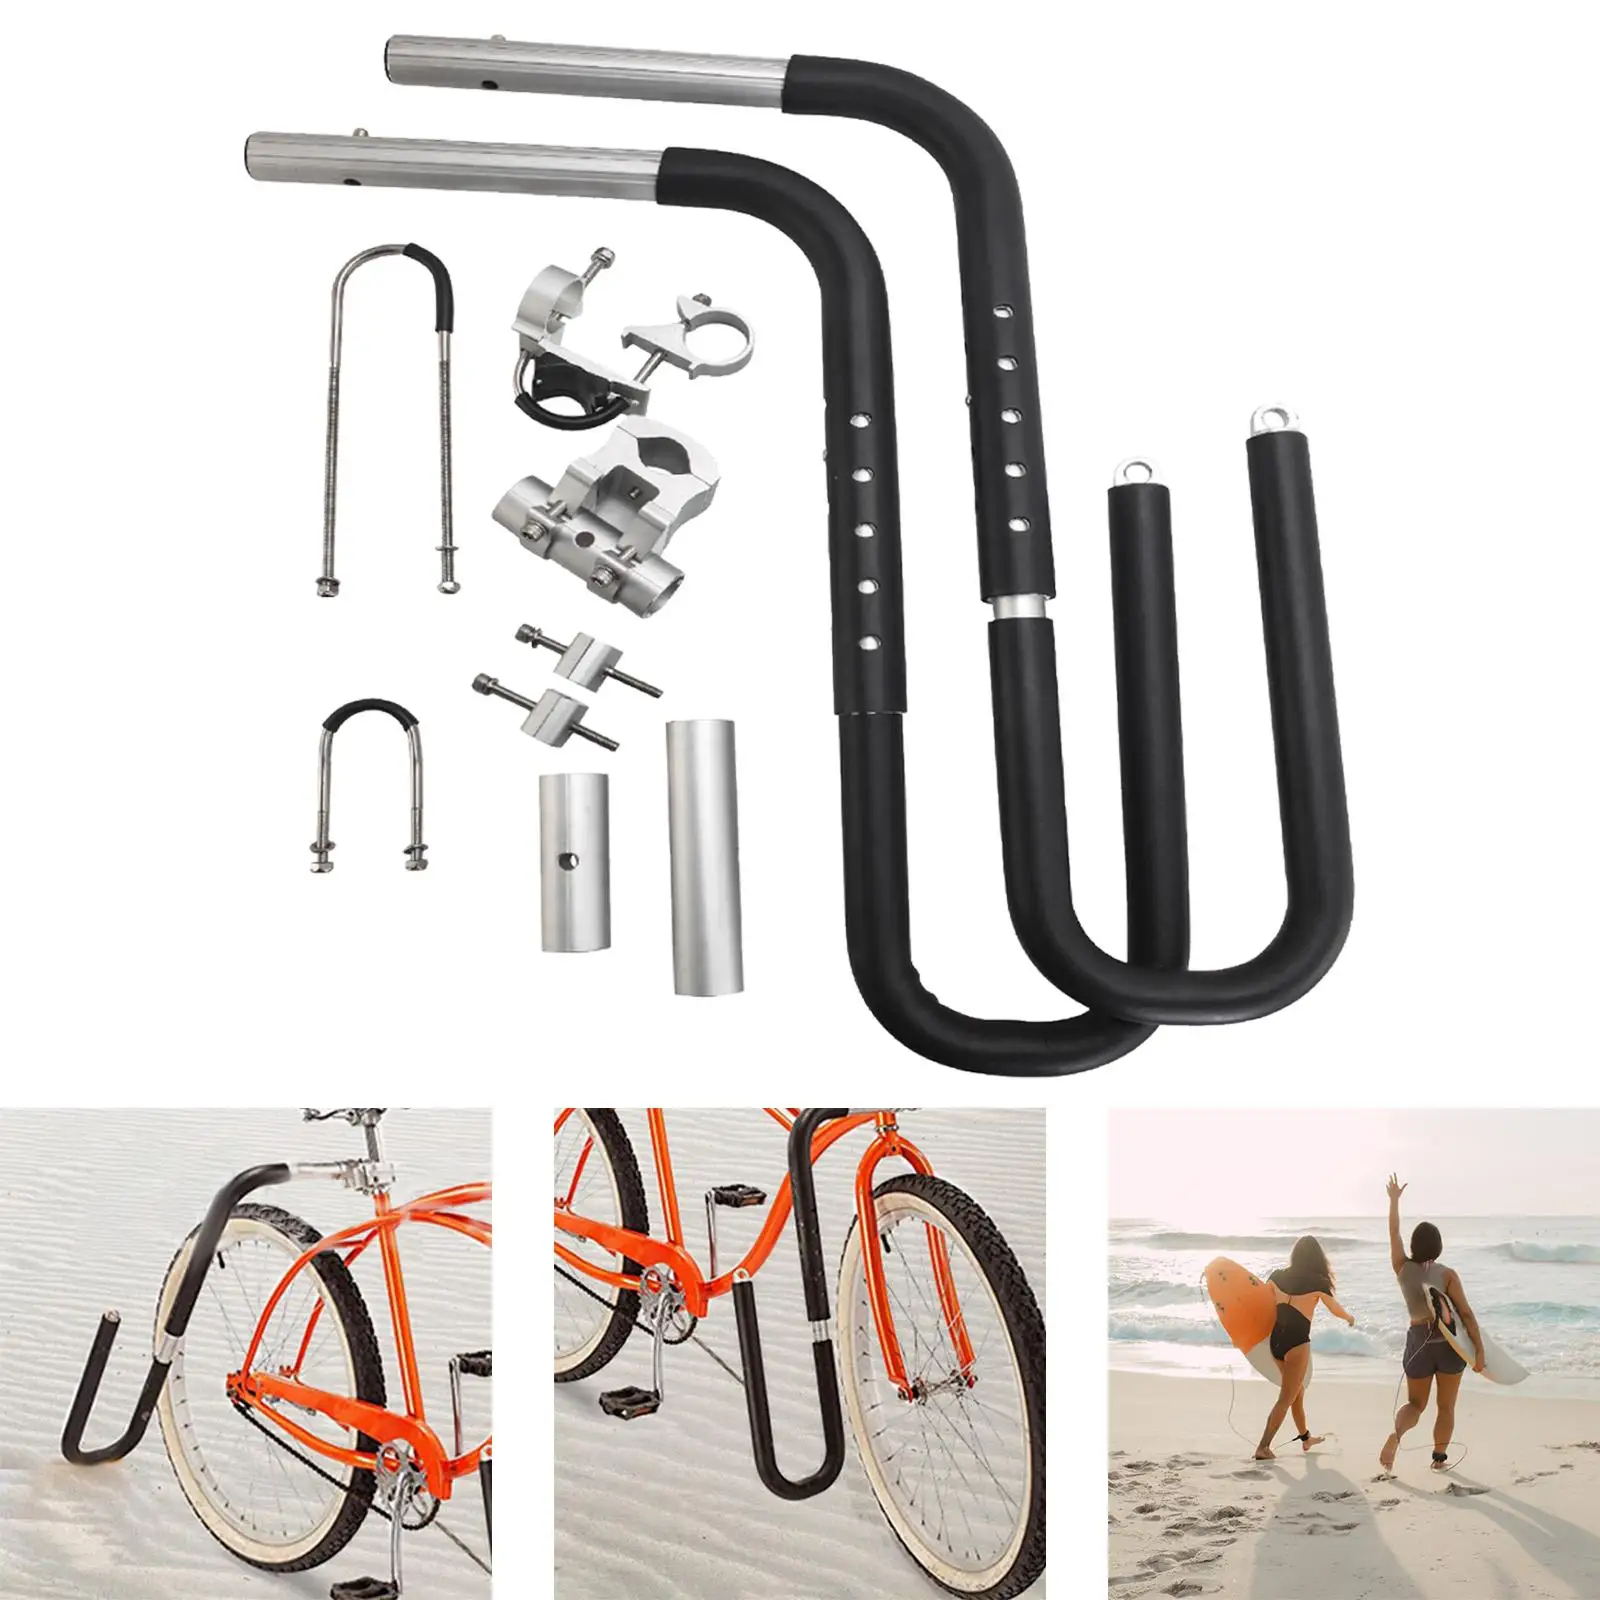 Universal Motorcycle Surfboard Carrying Holder Frame Portable  Surfing